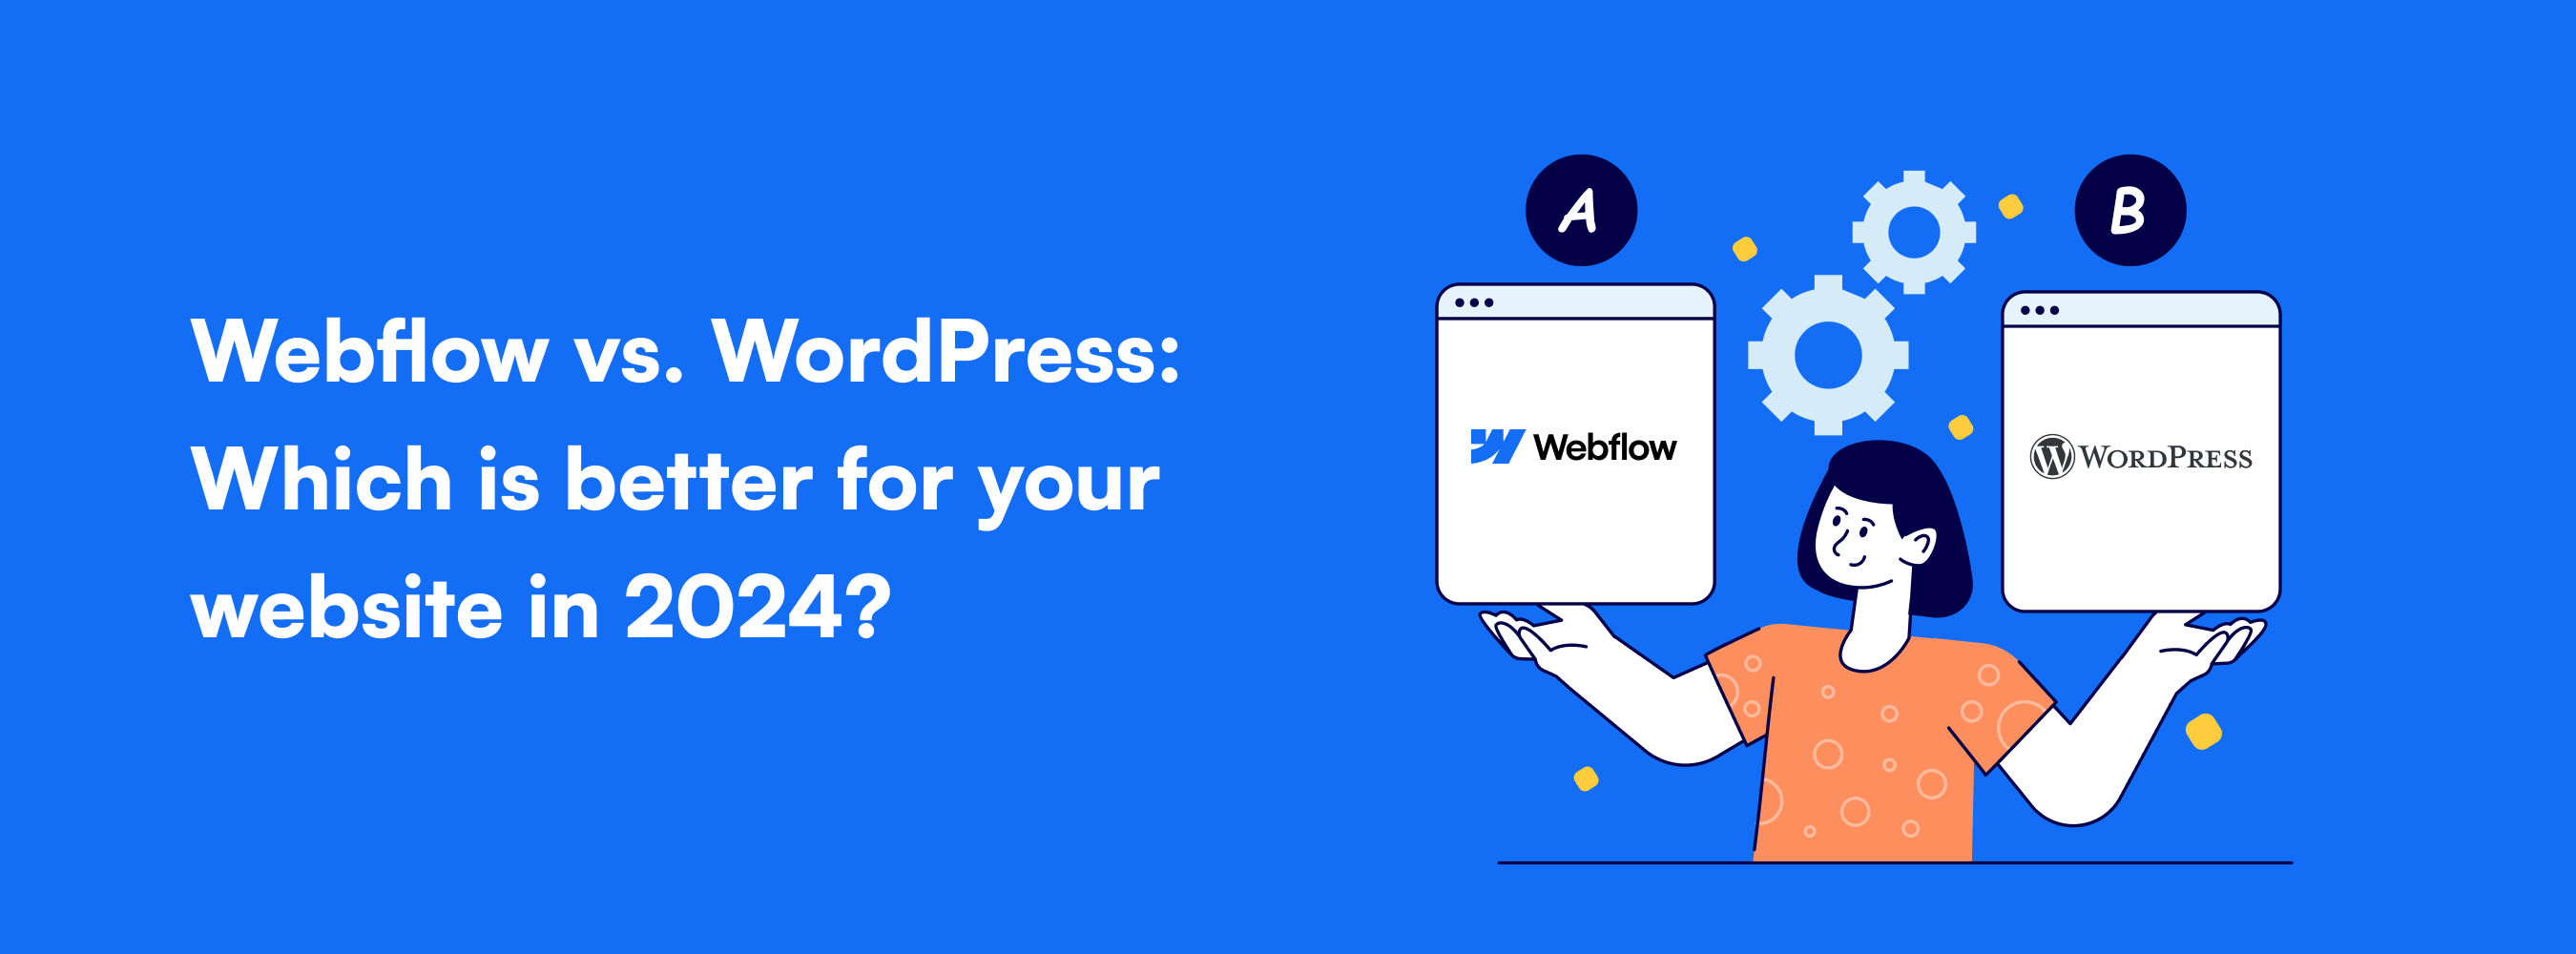 Webflow vs. WordPress_ Which is better for your website in 2024